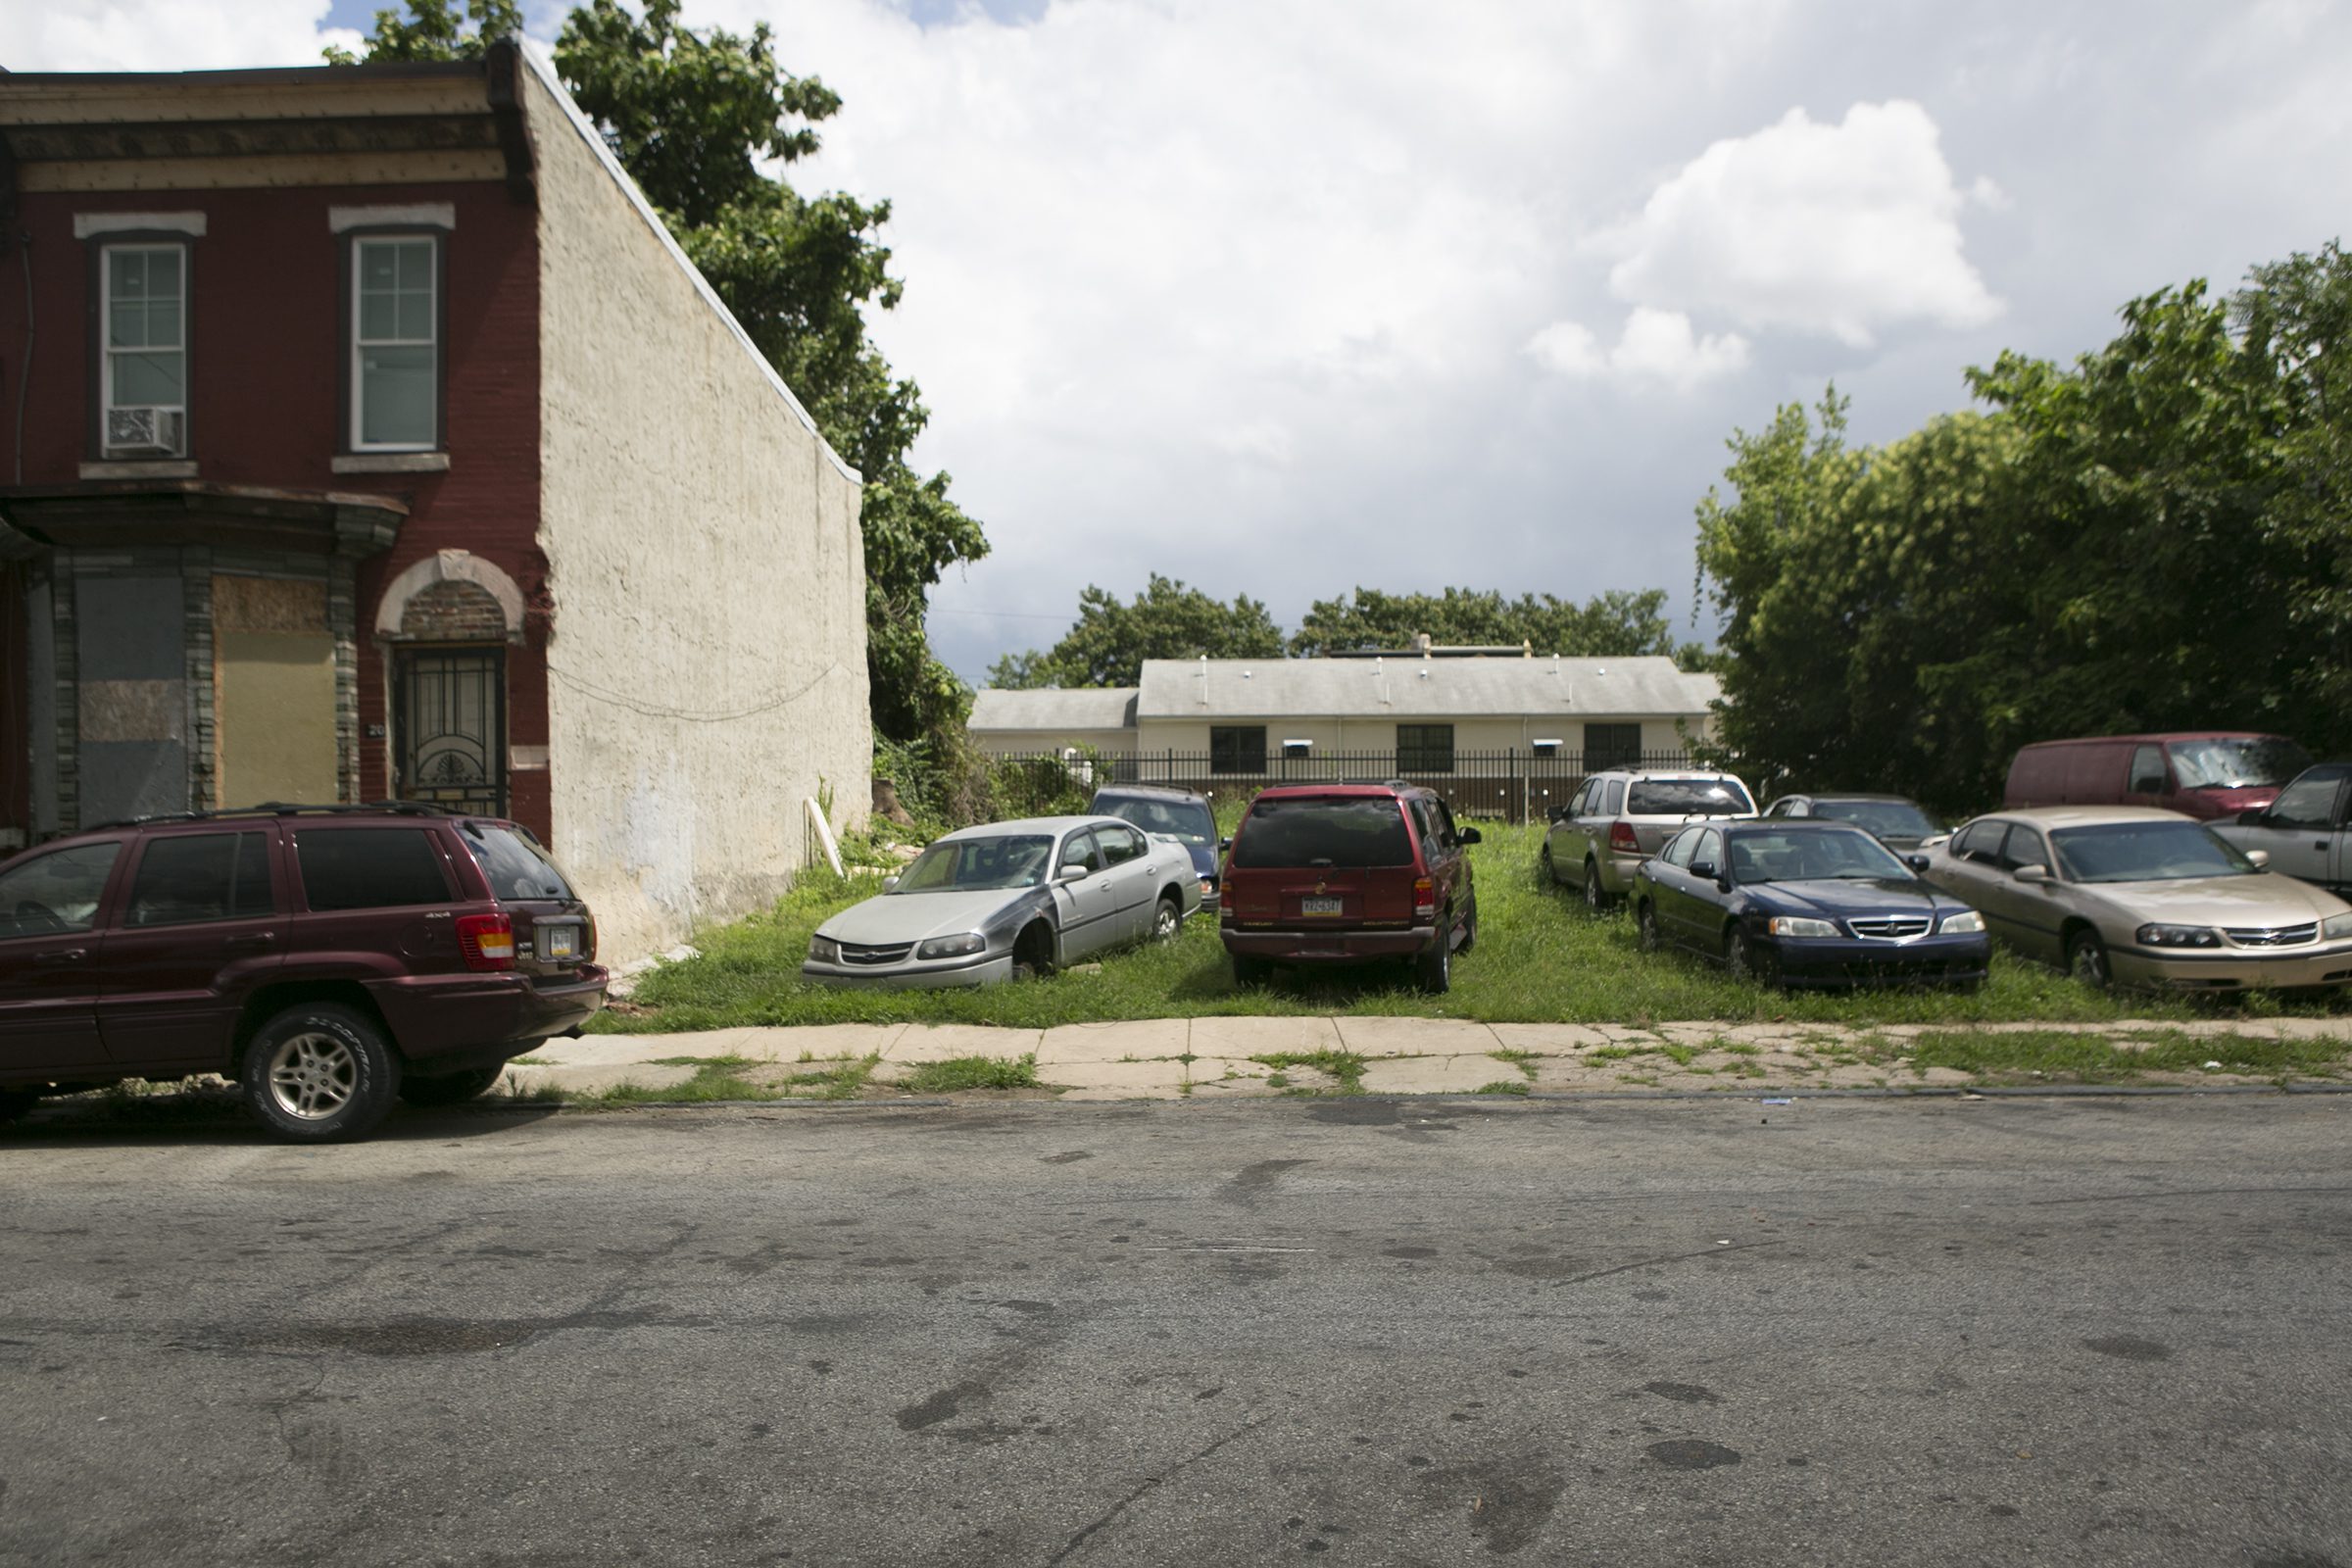 A vacant lot in Philly that serves as an unofficial parking lot.